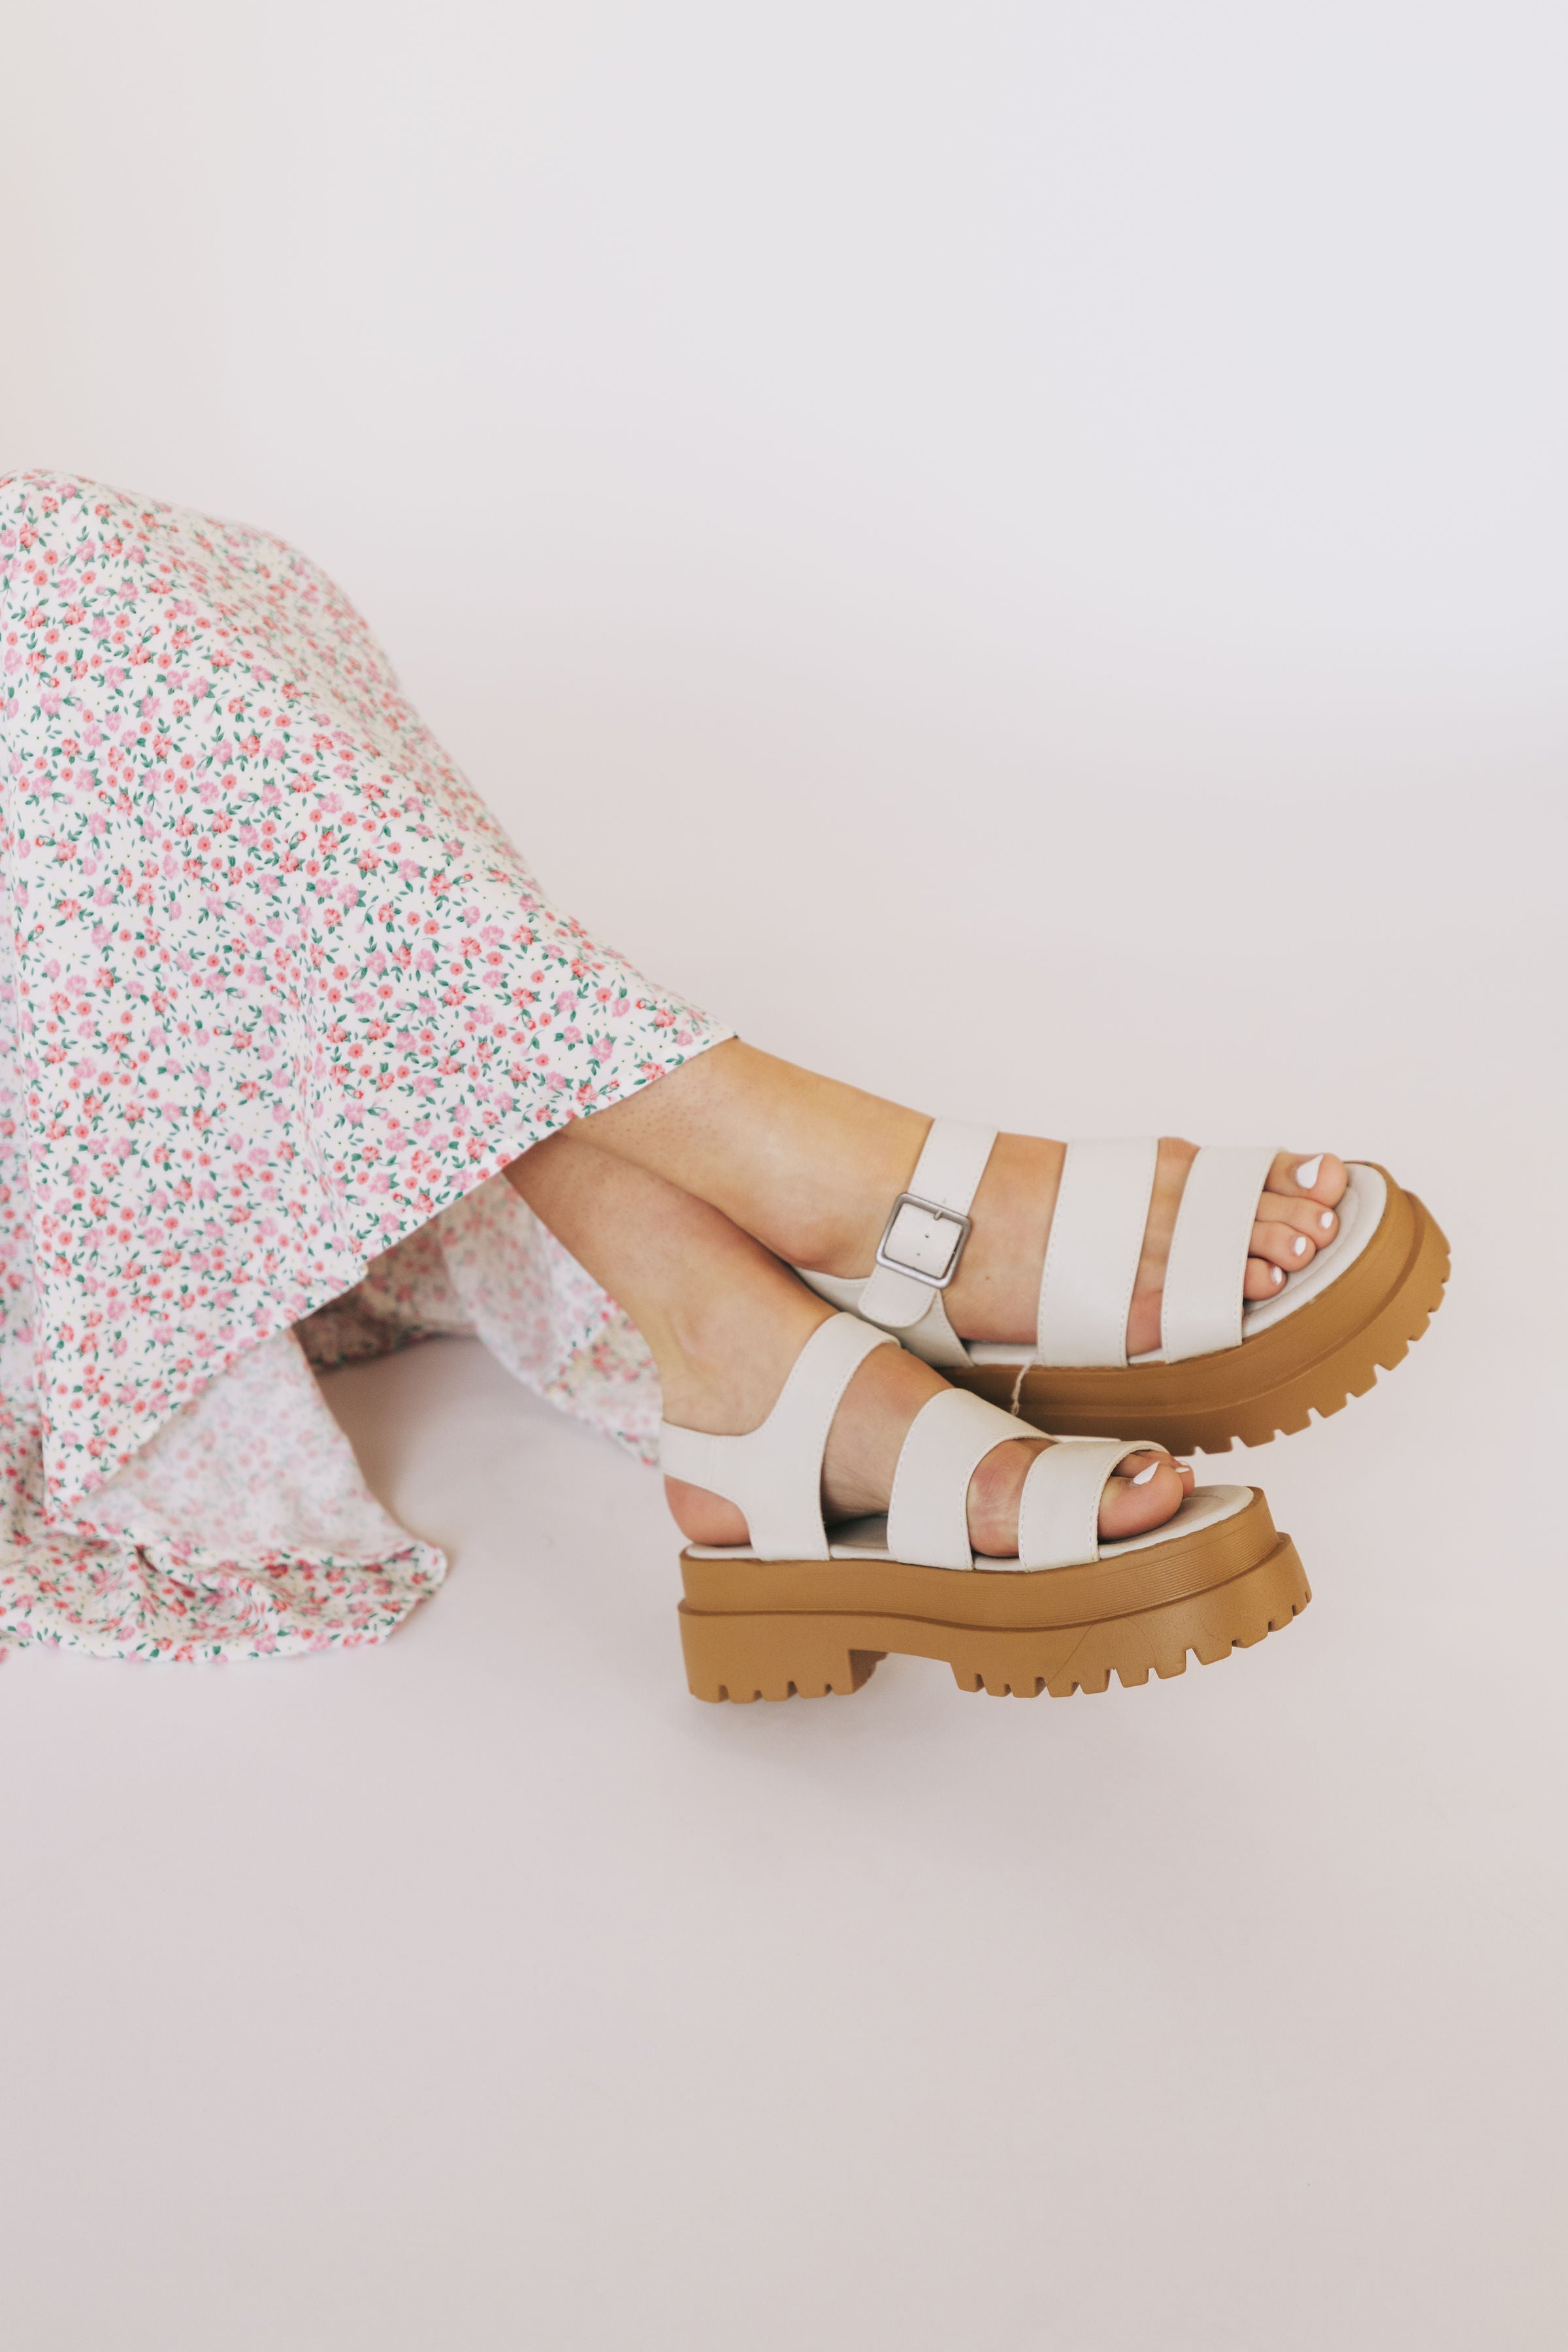 CHINESE LAUNDRY - Baddie Sandals - 2 Colors